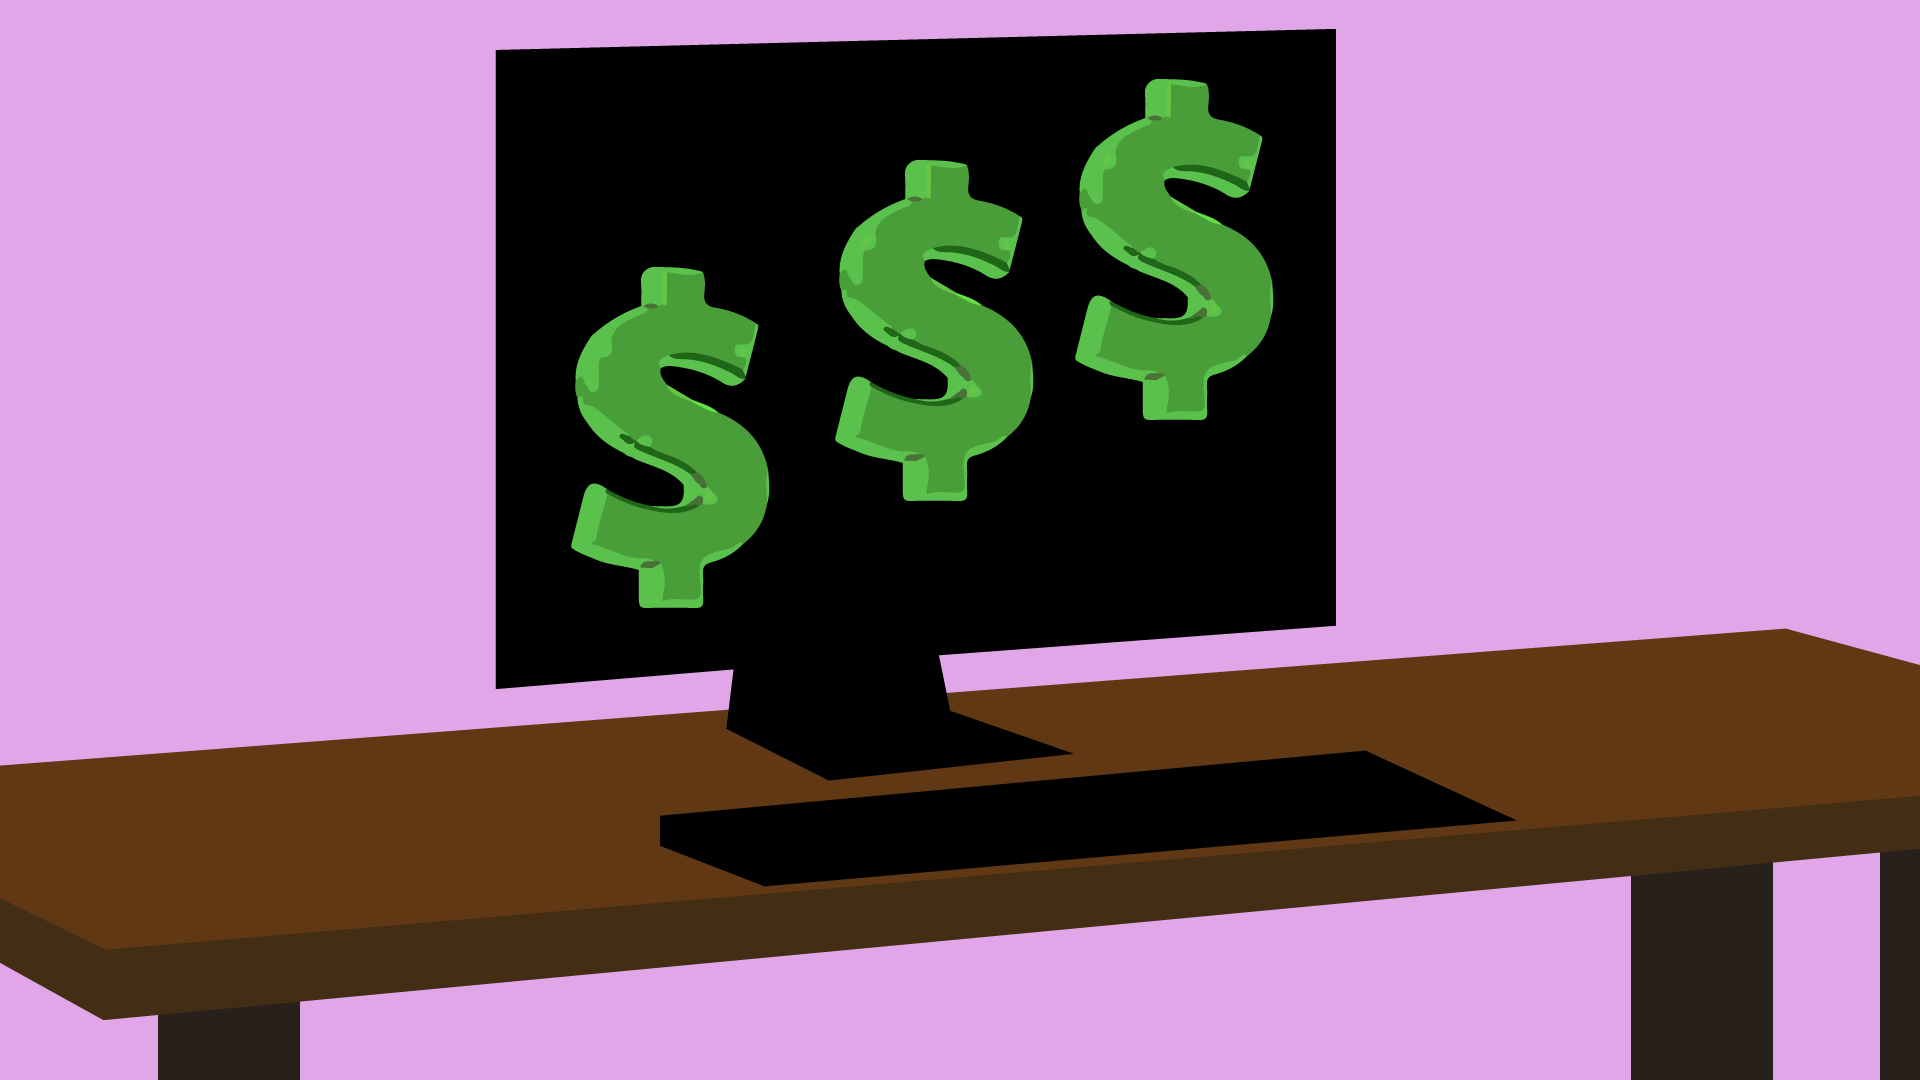 Graphic depiction of a computer screen with three green dollar signs with a lavender background